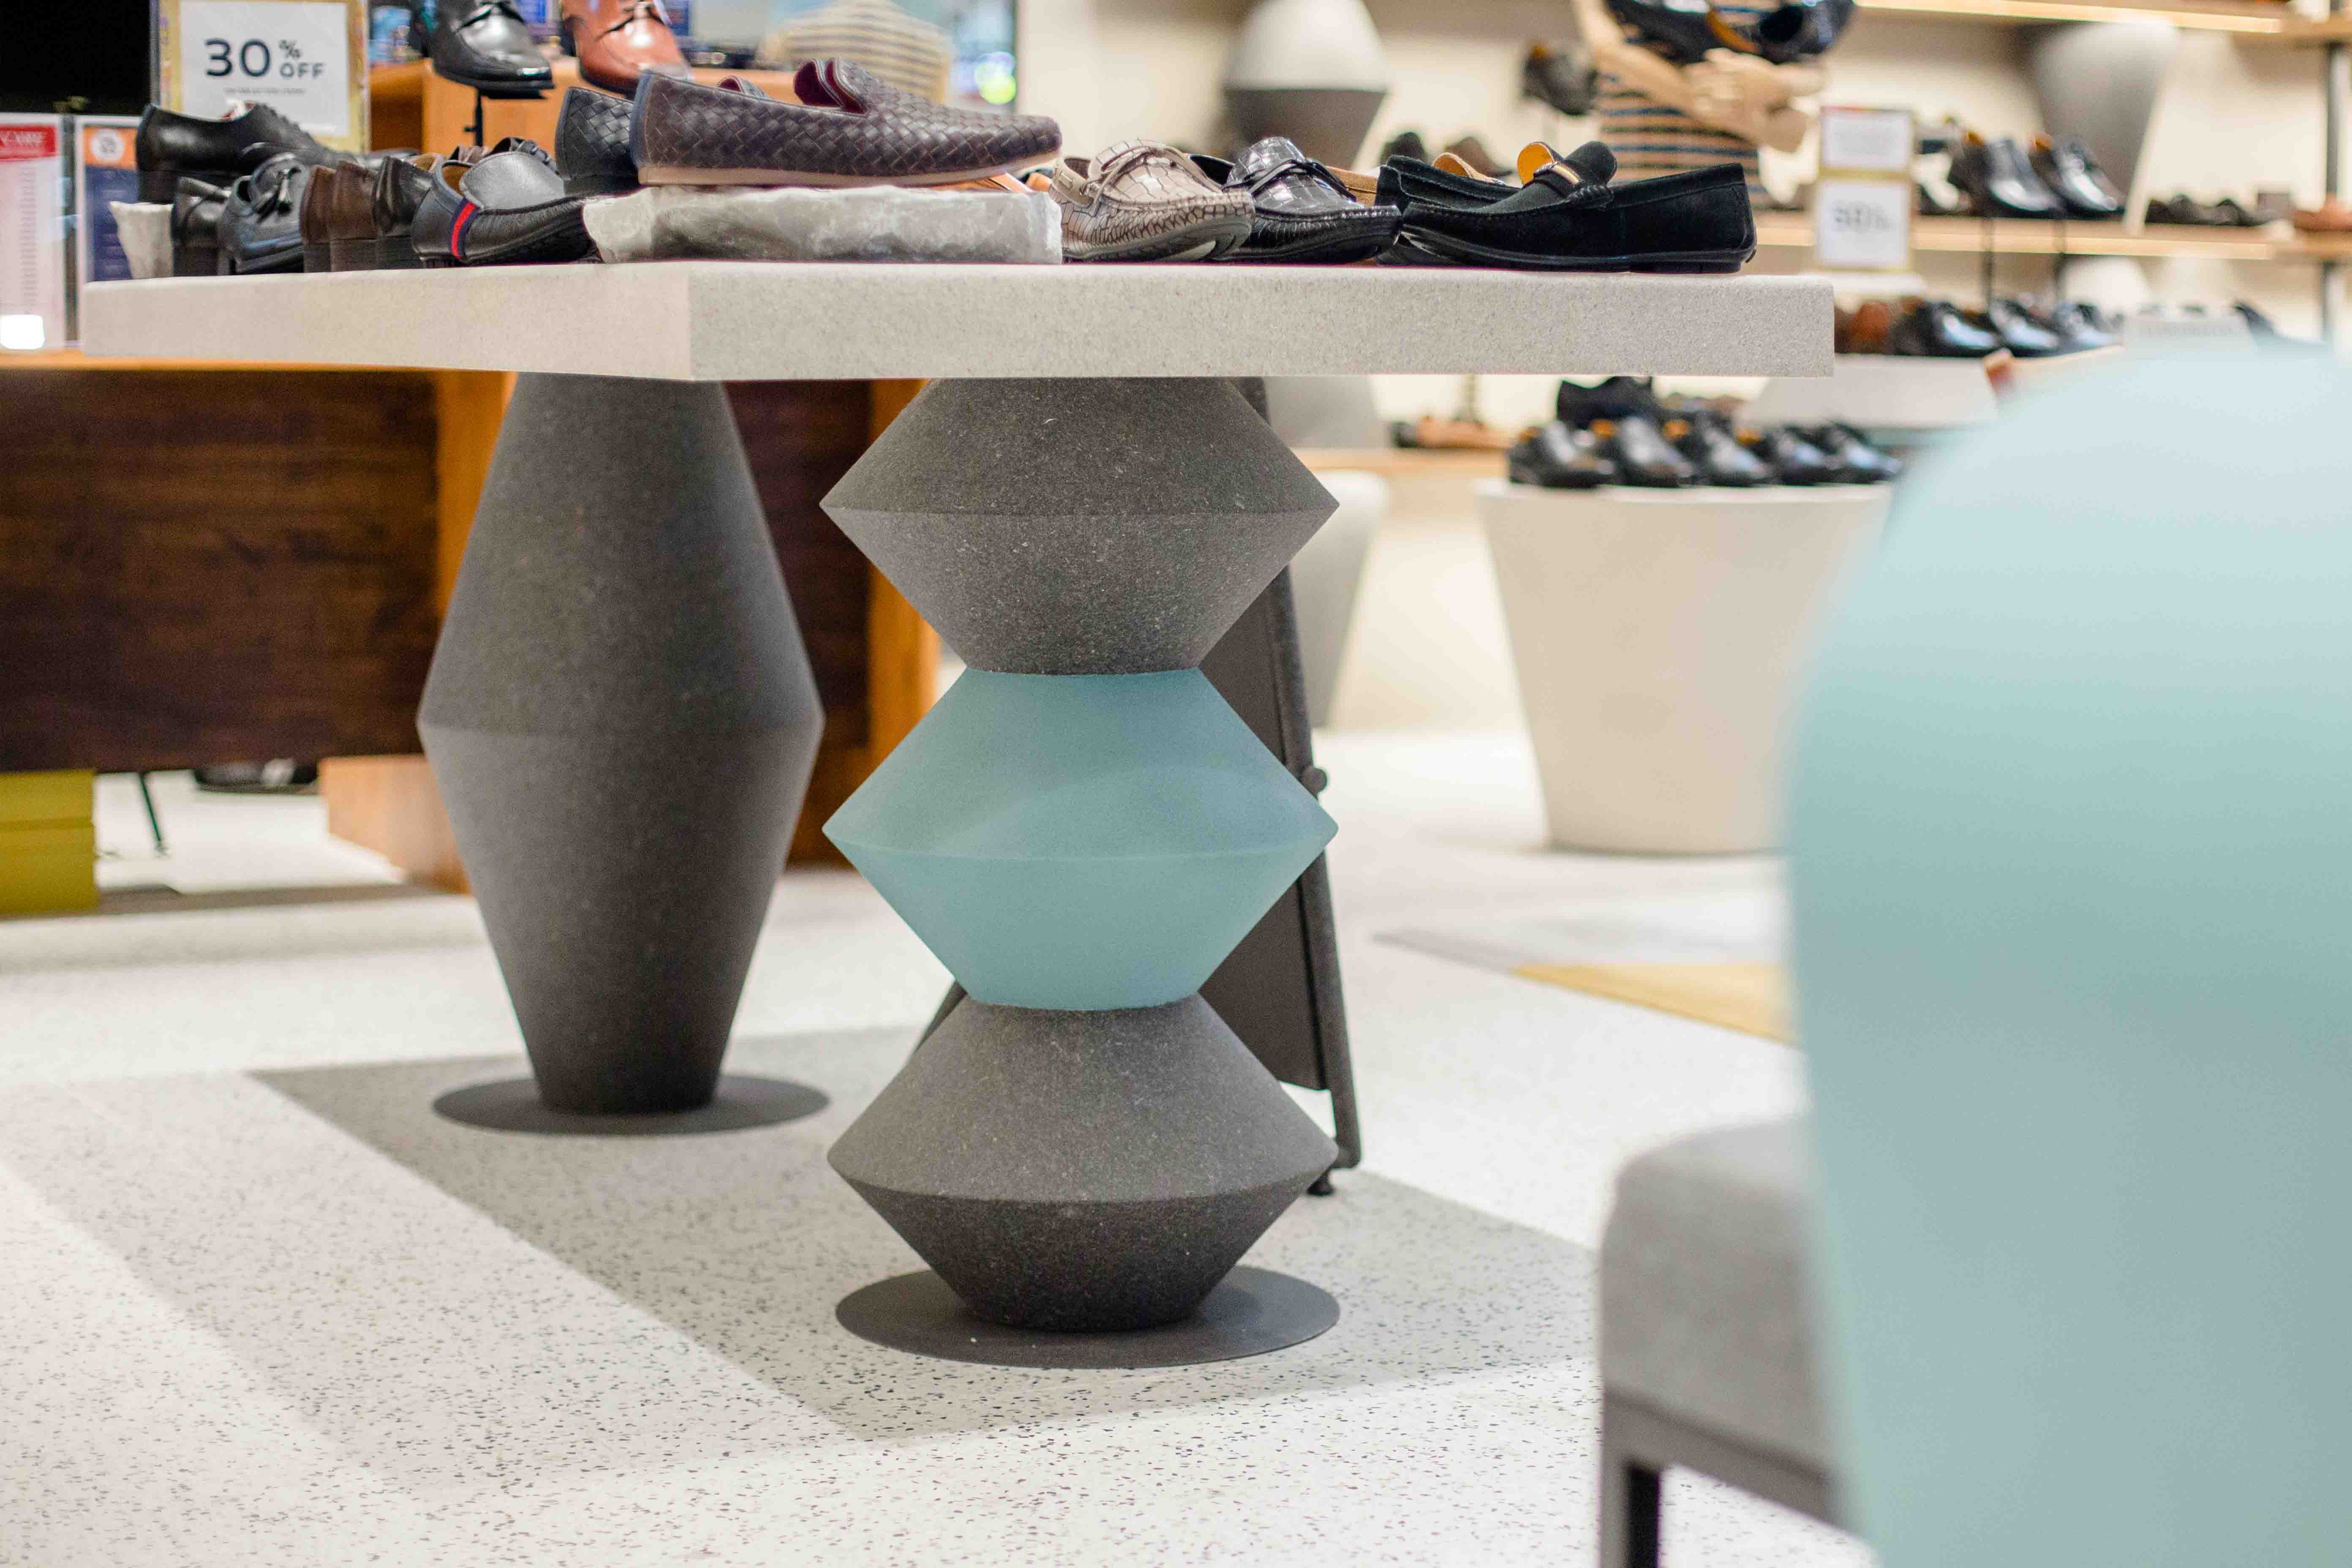 The merchandise table, desktop and table leg are sprayed with different color faux-stone coating. The granite colors and veins create a color flash design.